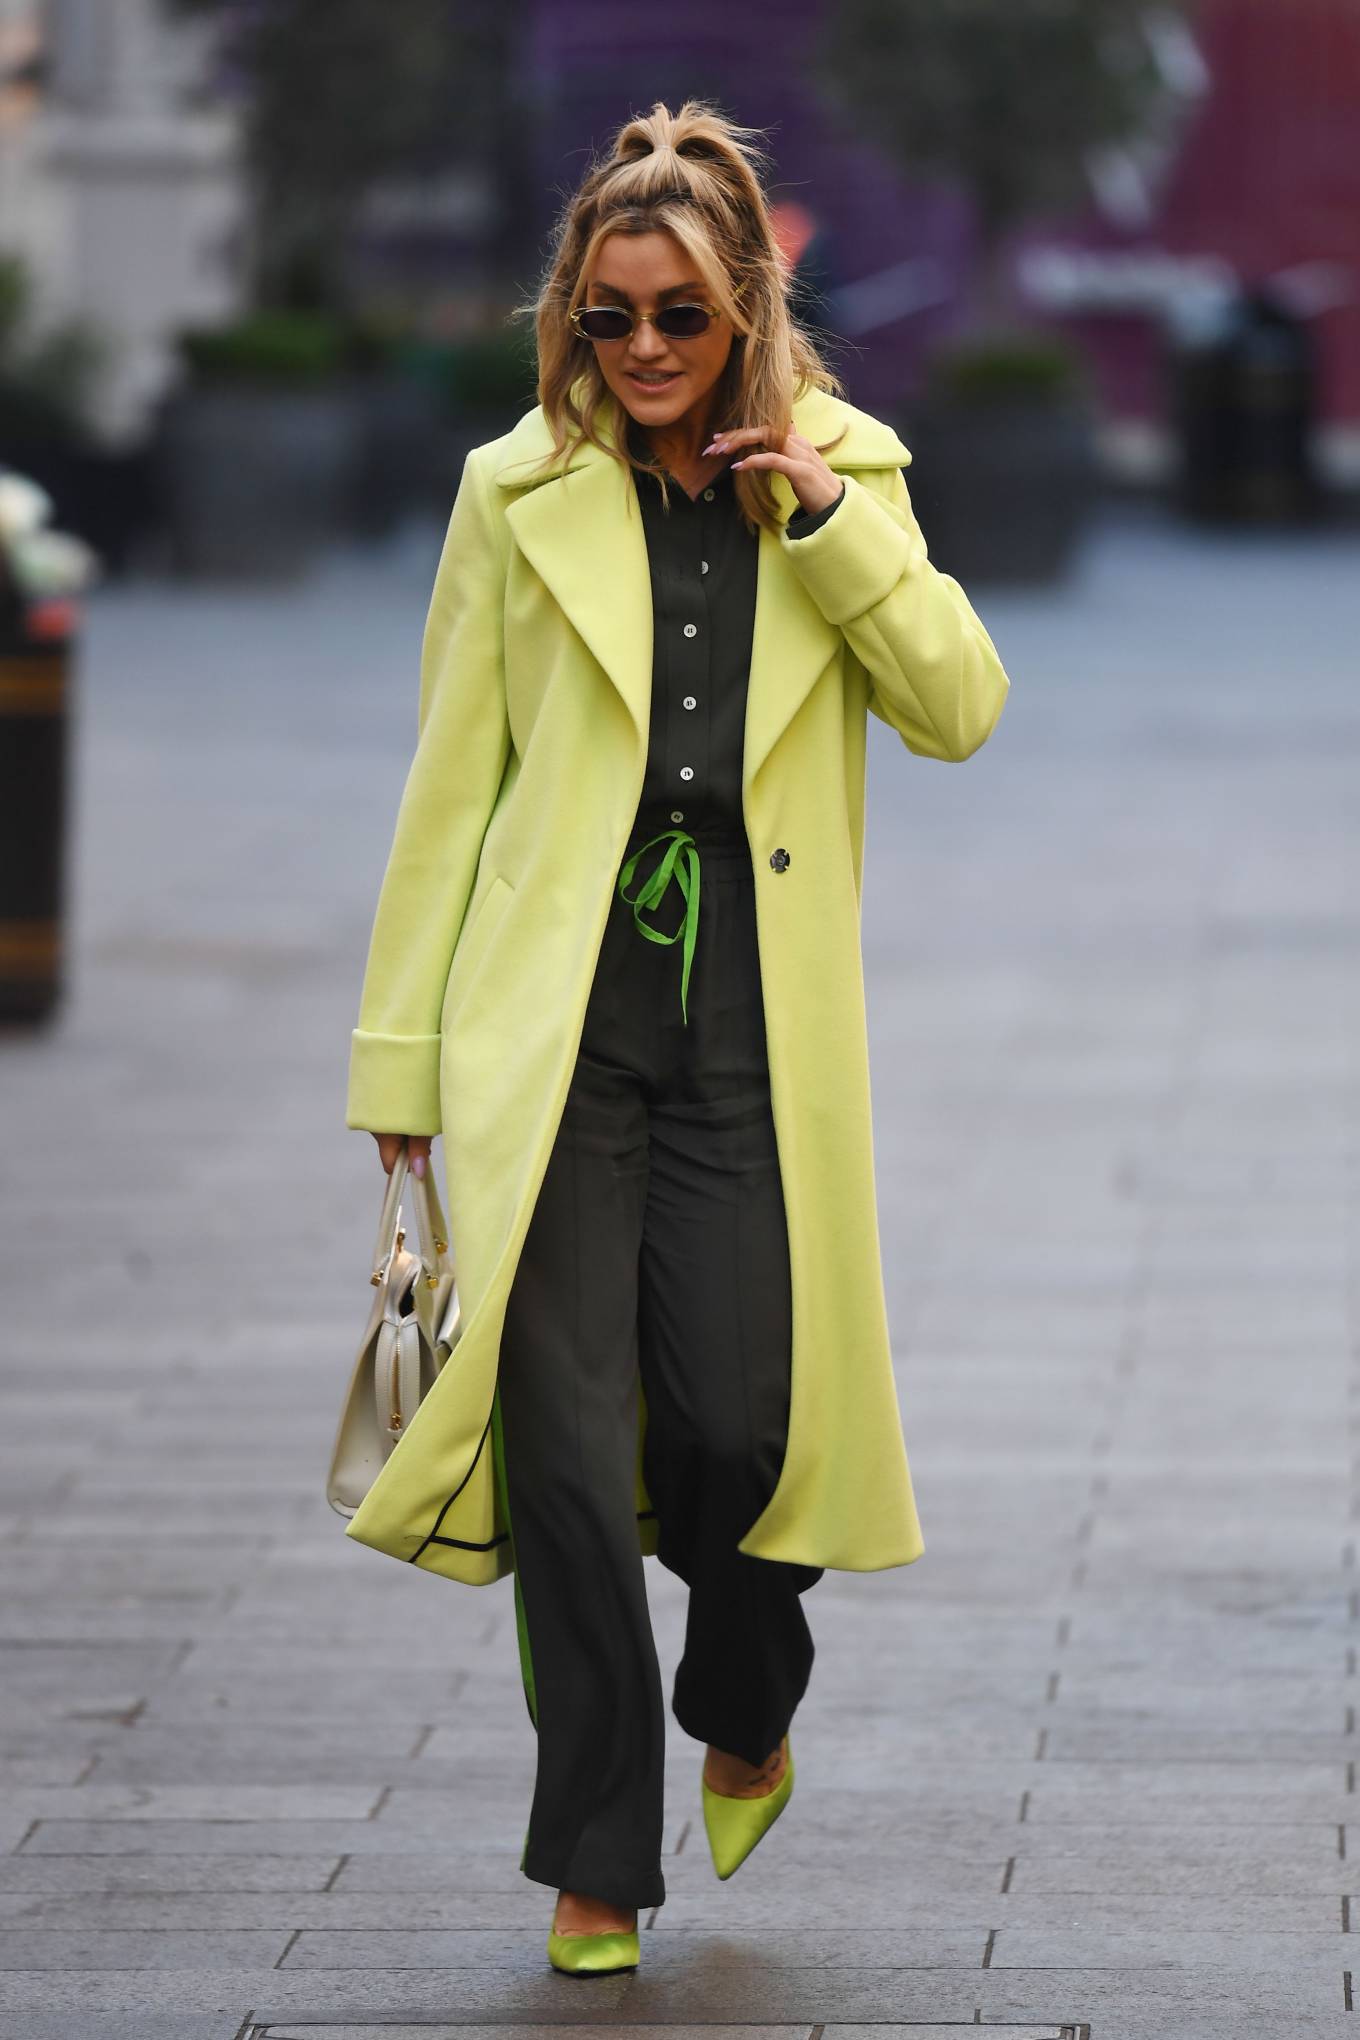 Ashley Roberts 2021 : Ashley Roberts – In a lime green trench coat at Heart radio in London-18